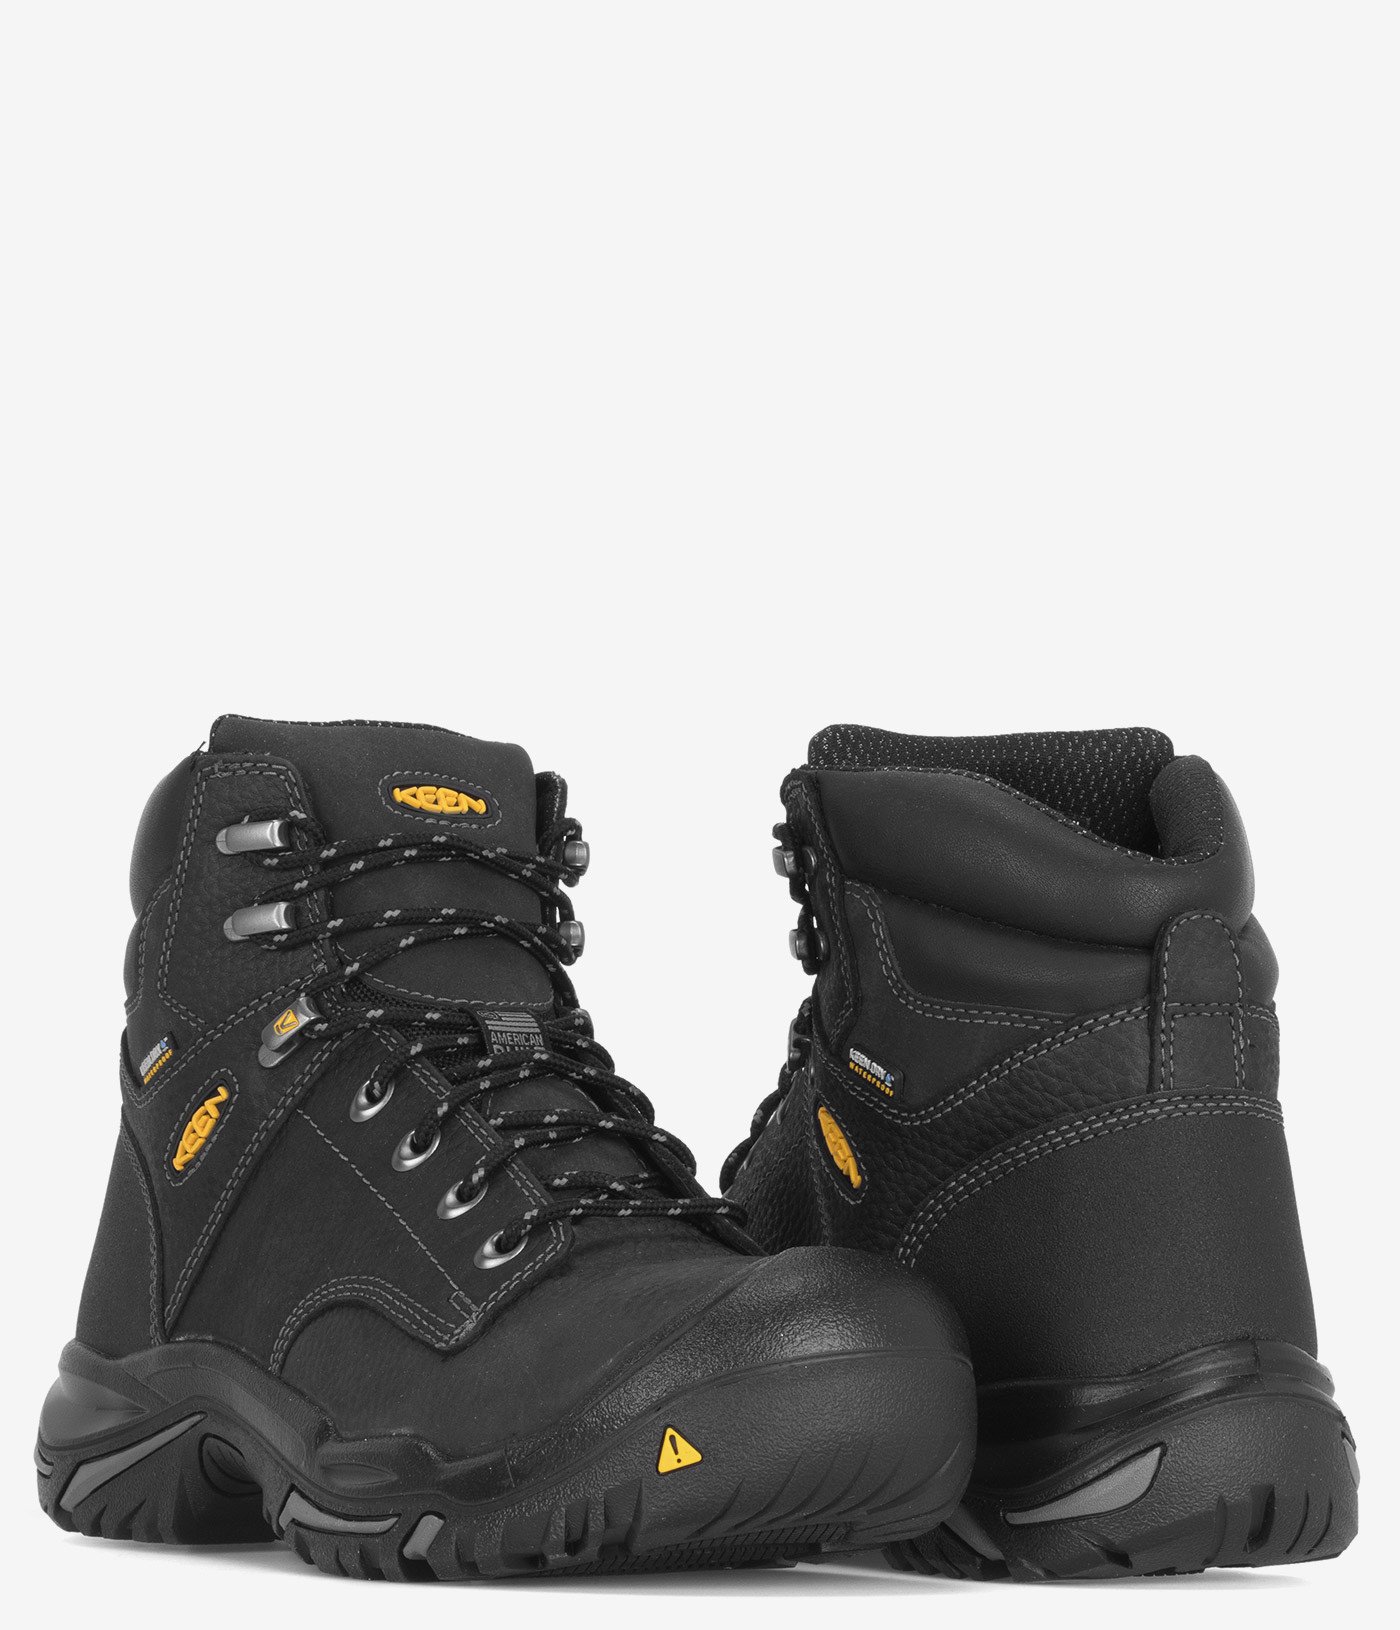 KEEN Utility Mt. Vernon Waterproof Mid Safety Toe Boot